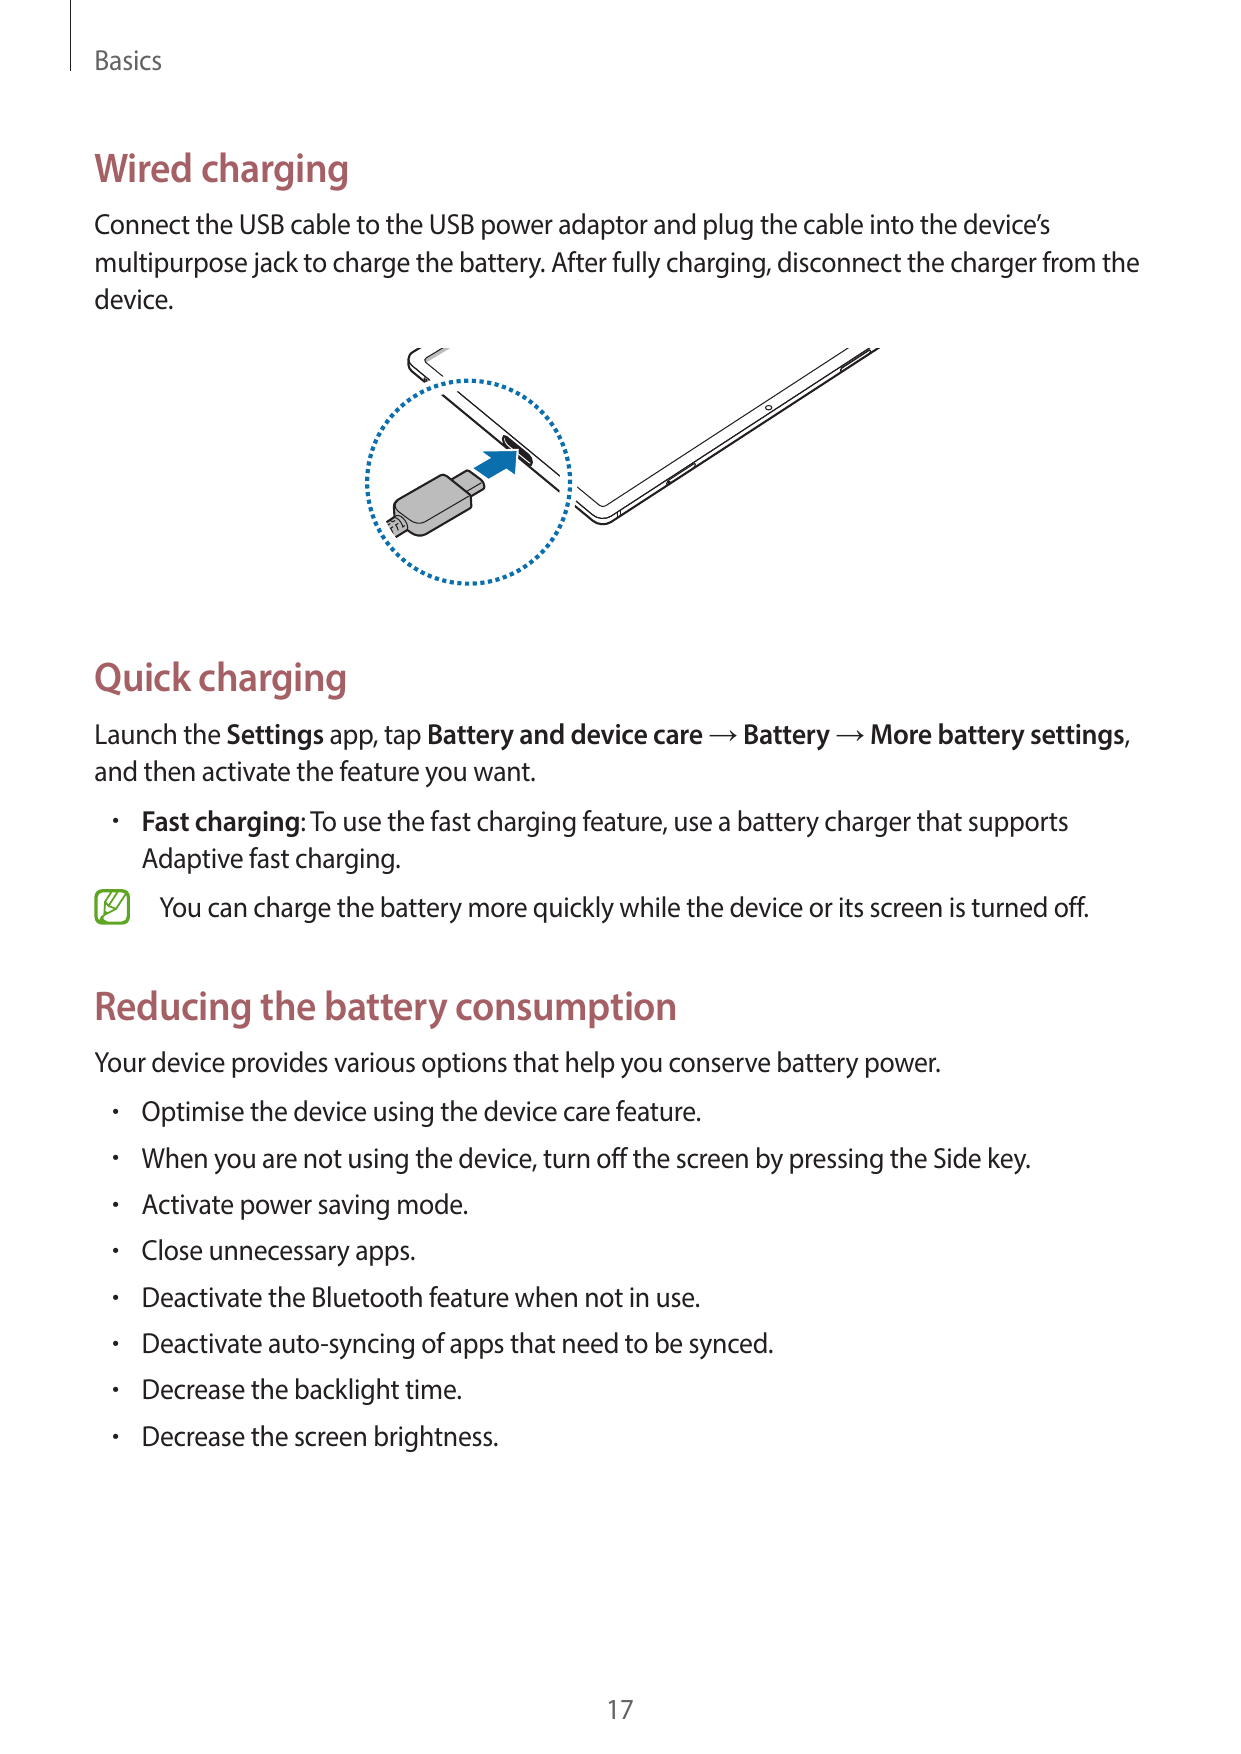 BasicsWired chargingConnect the USB cable to the USB power adaptor and plug the cable into the device’smultipurpose jack to char